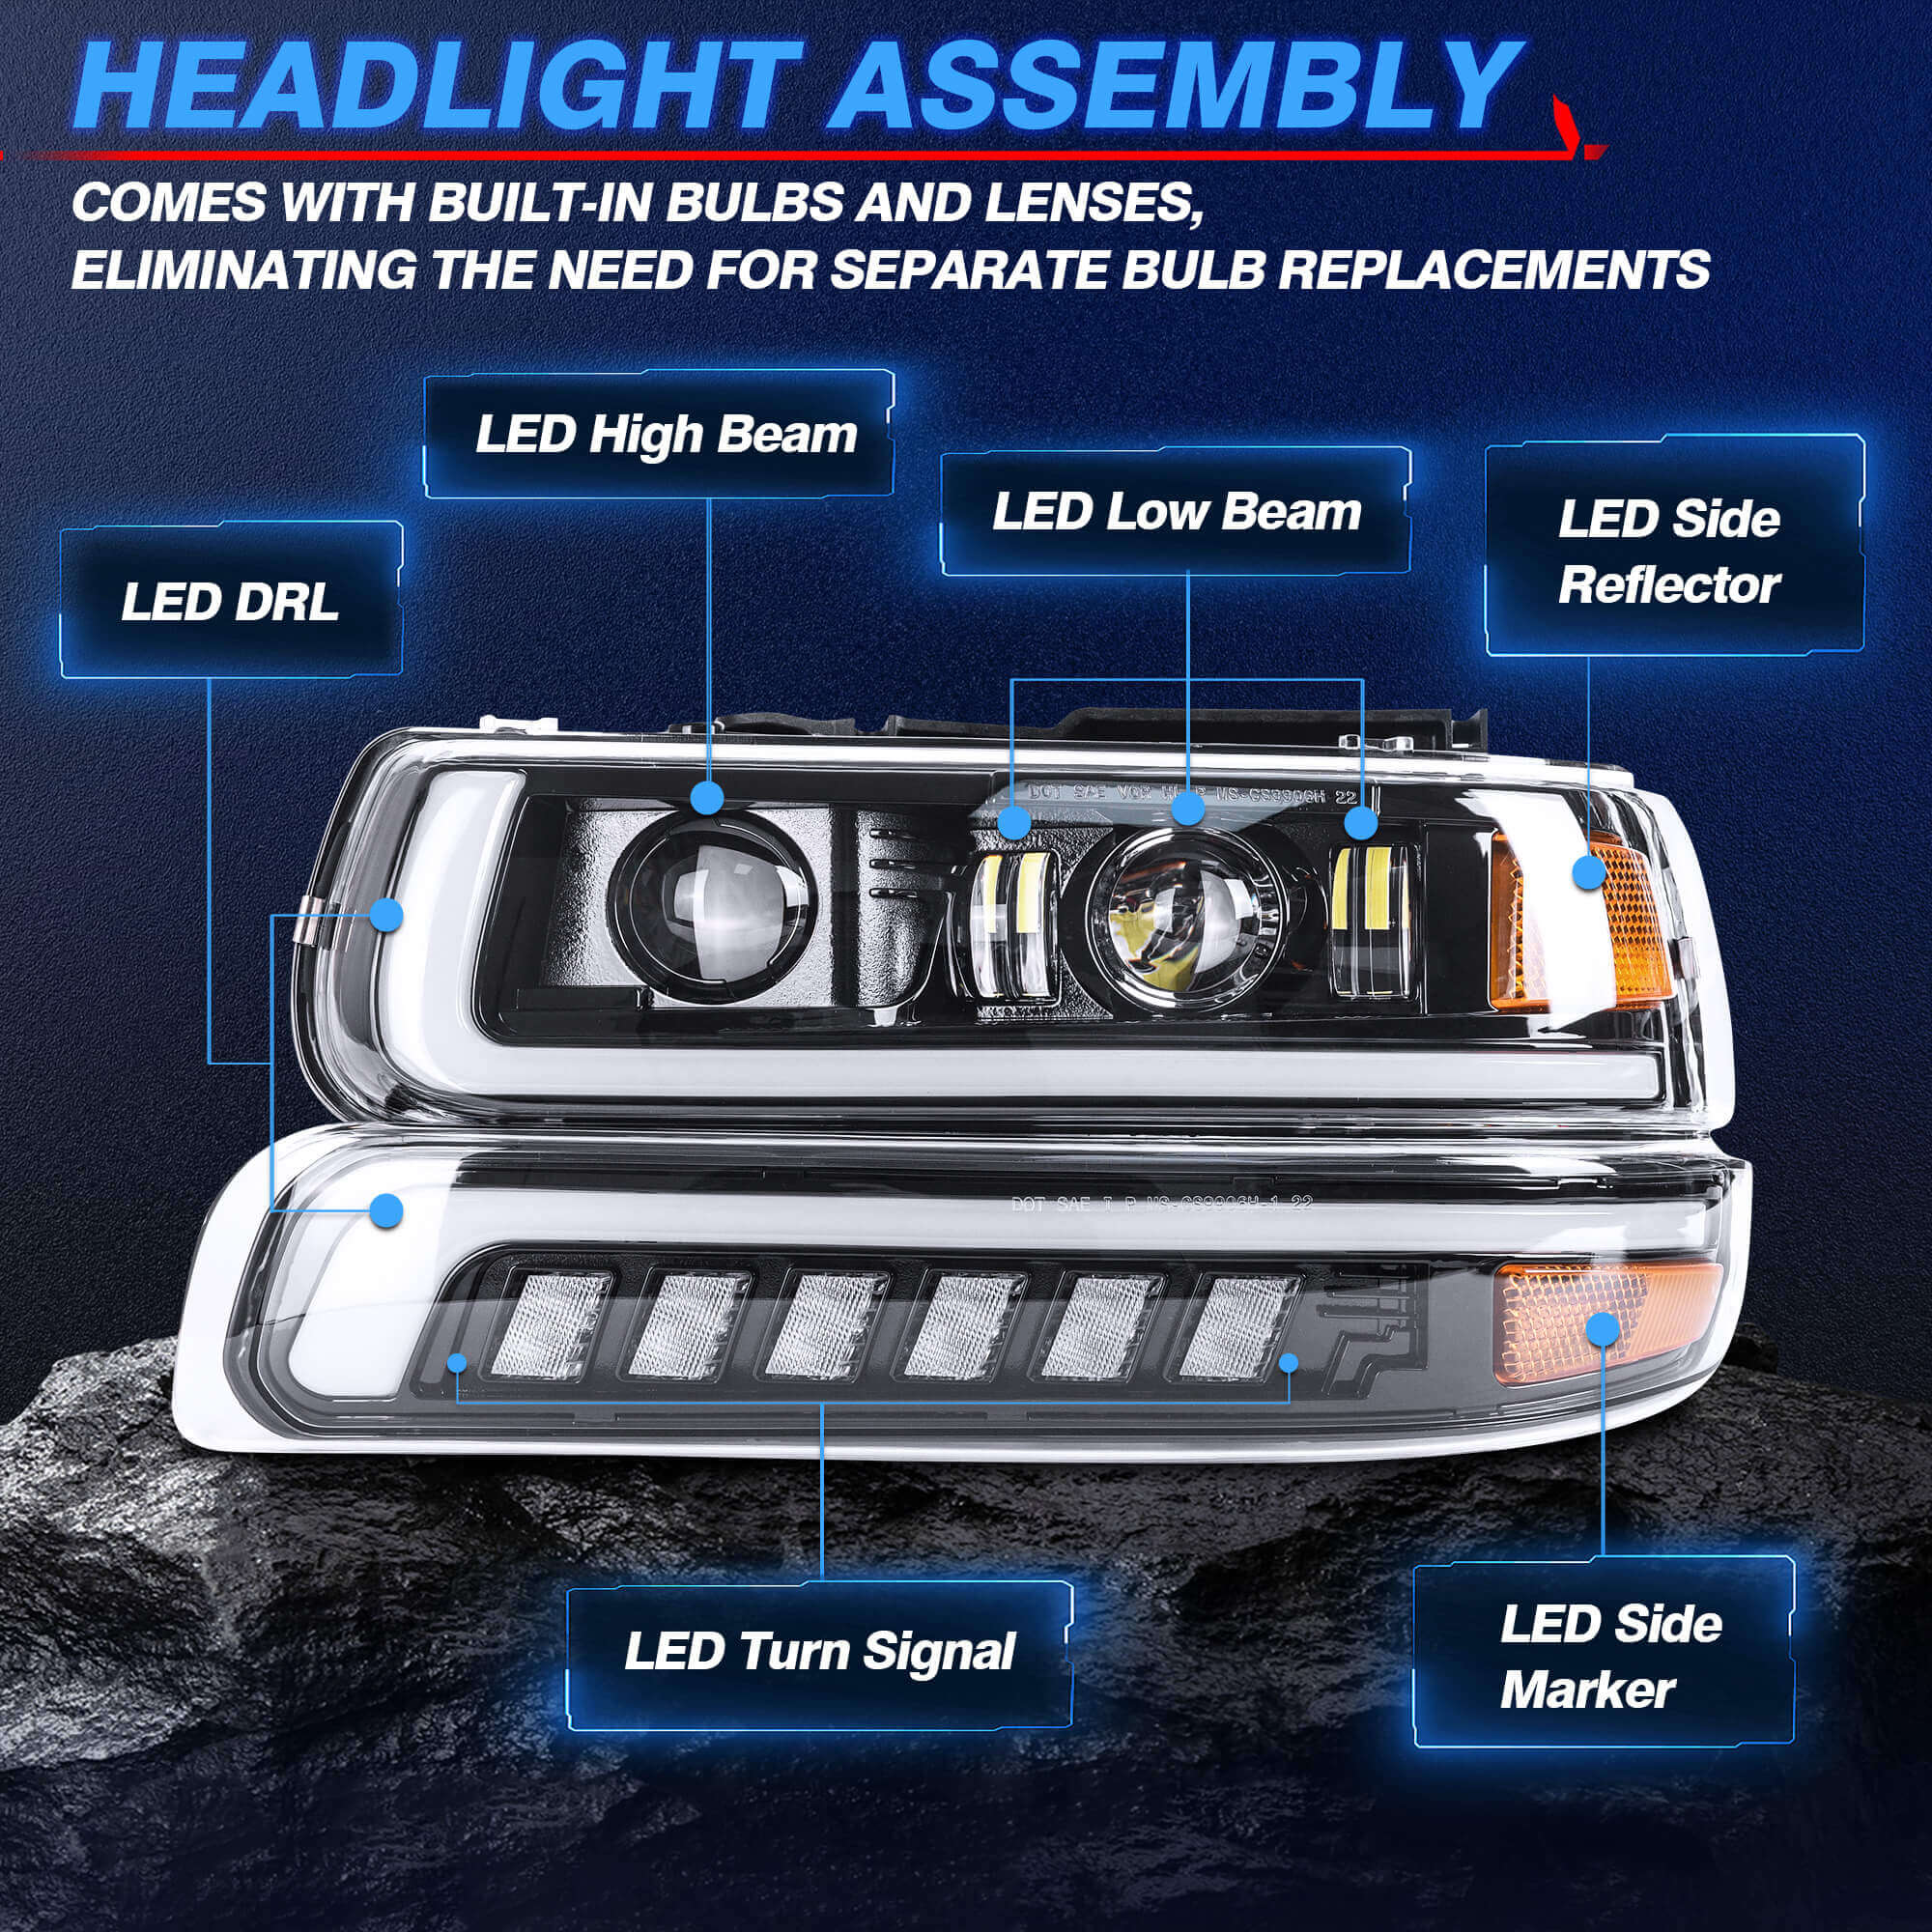 DOT Certified LED Headlight for 1999 - 2002 Chevy Silverado 1500 2500 with  DRL and Turn Signal Light for 2000-2006 Suburban 1500 - China LED  Headlight, LED Headlight for Chevy Silverado